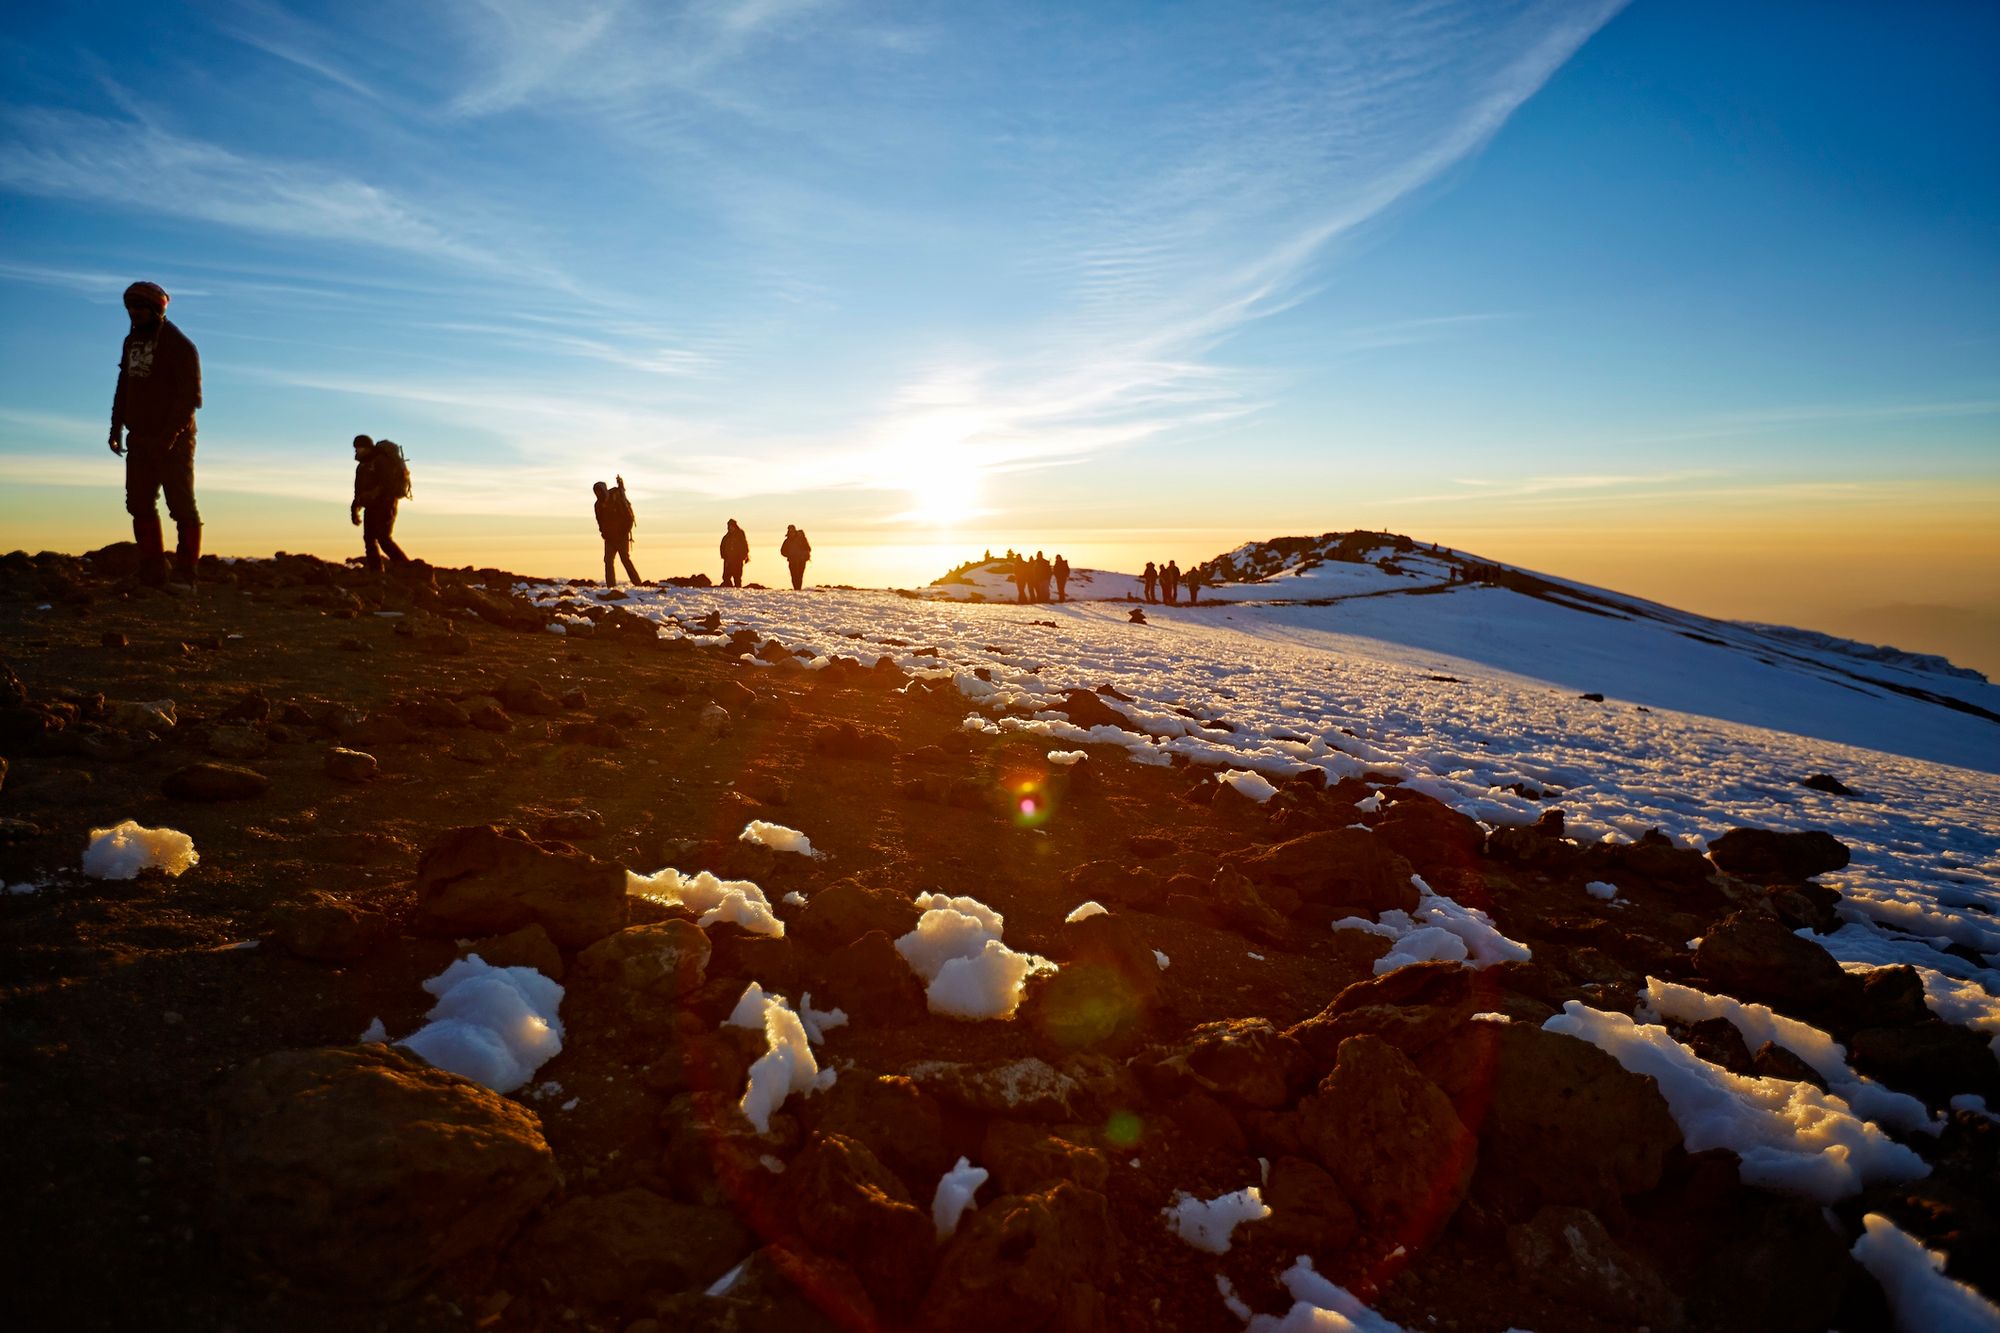 Kilimanjaro Routes | Which is the Best Route to Climb Kilimanjaro?